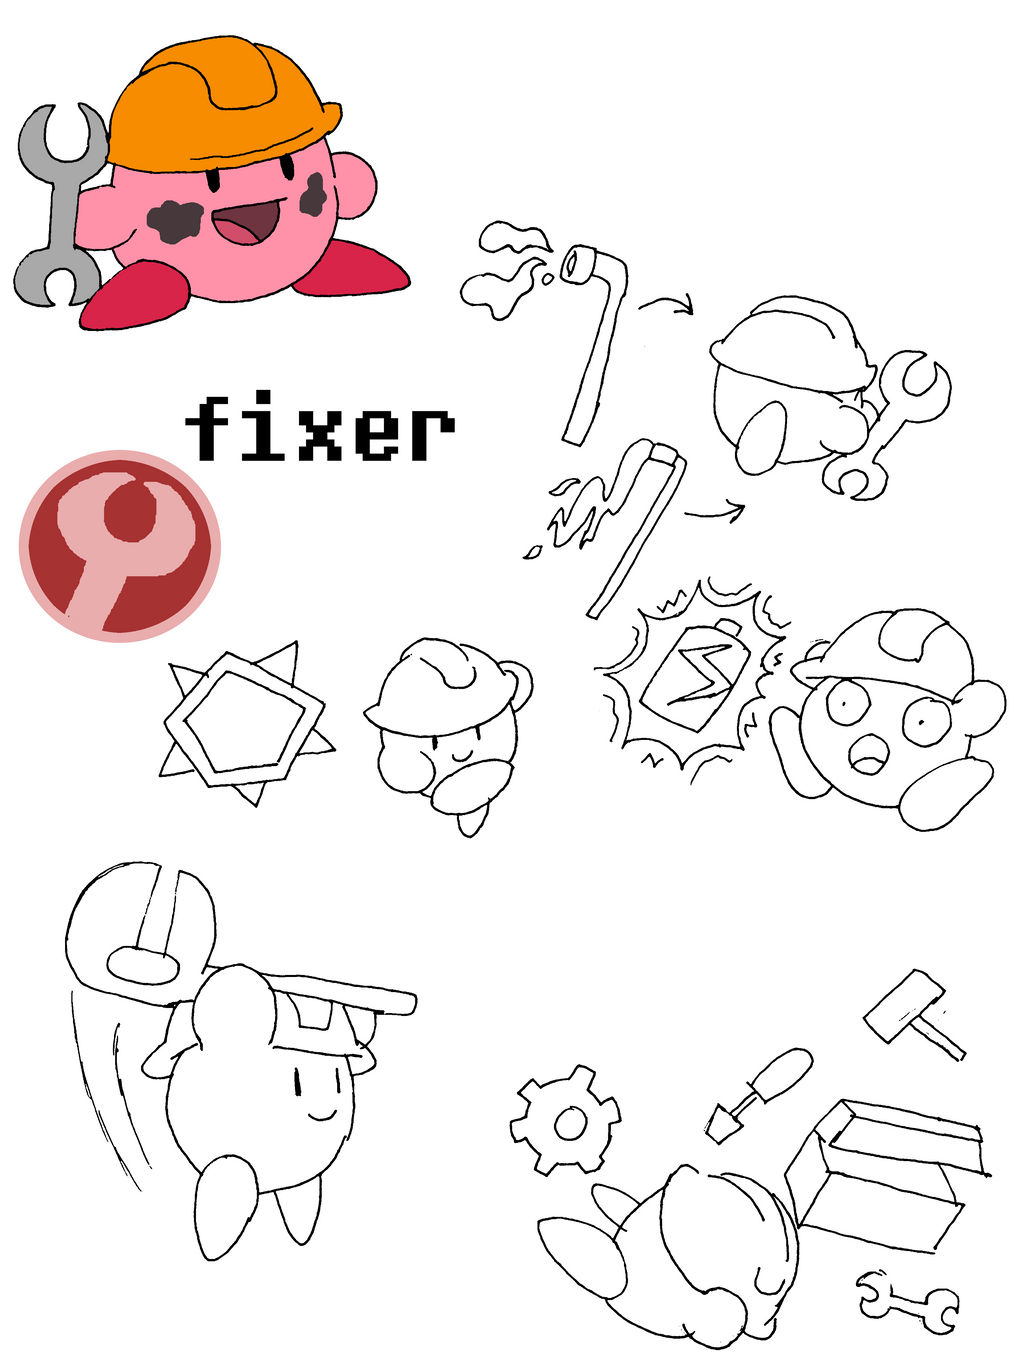 Fixer Kirby- Concept by that-one-guy-again on DeviantArt